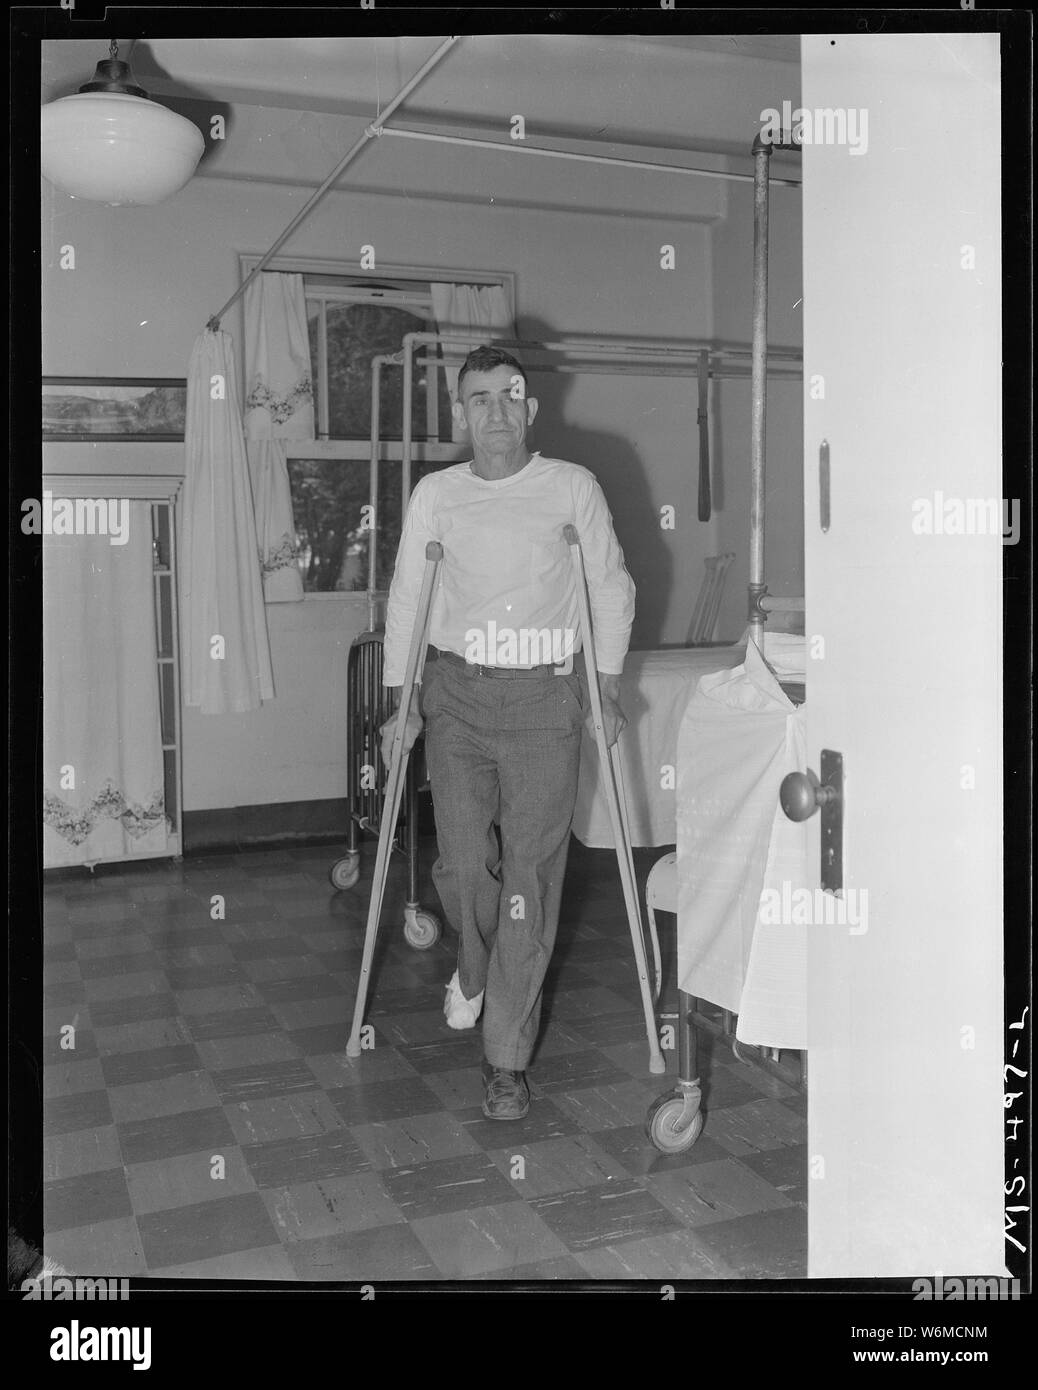 Telesfro Deluna, miner, walking on crutches. He is recovering from foot injured in mine accident. He has received medical care at this company owned hospital. Colorado Fuel & Iron Company, Pueblo, Colorado. Stock Photo